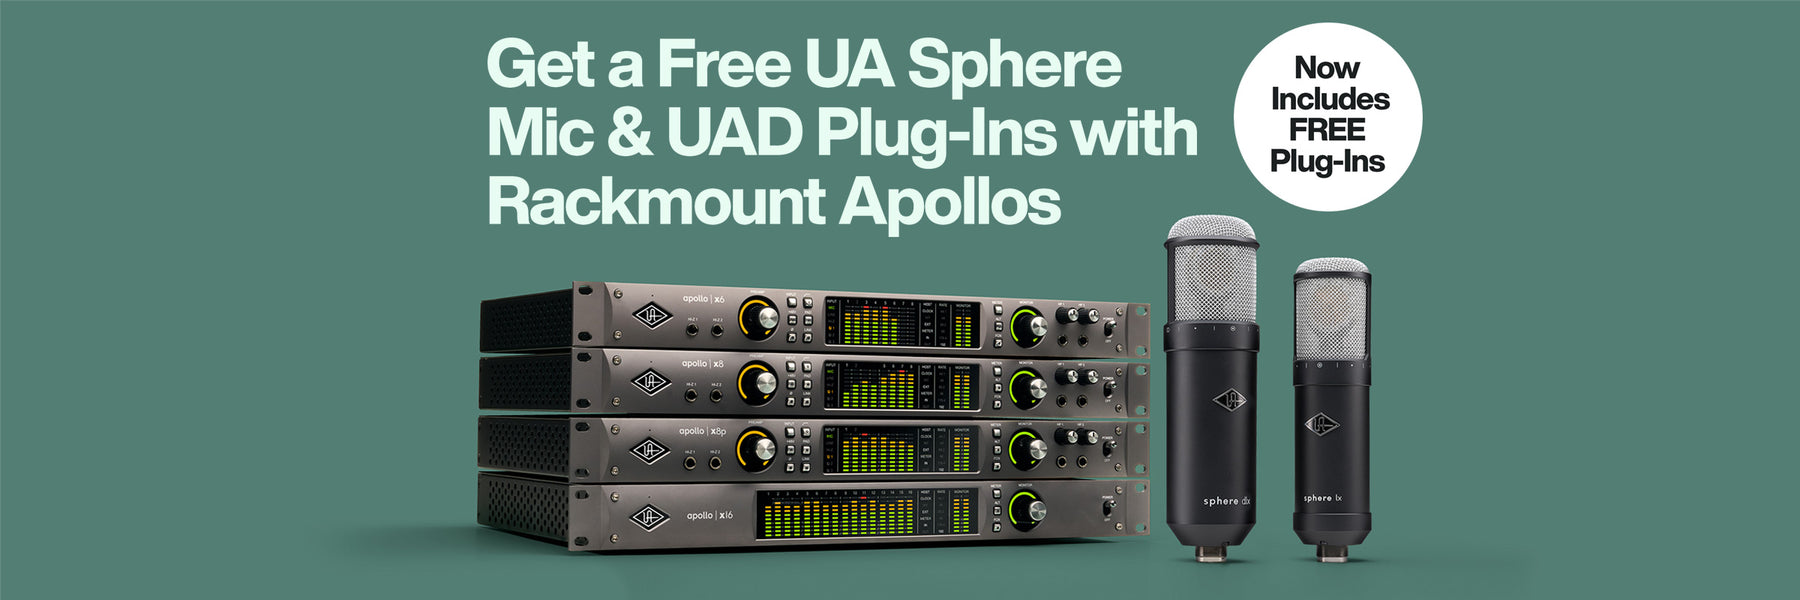 Get a Free UA Sphere Modeling Mic & UAD Plug-Ins with Rackmount Apollos